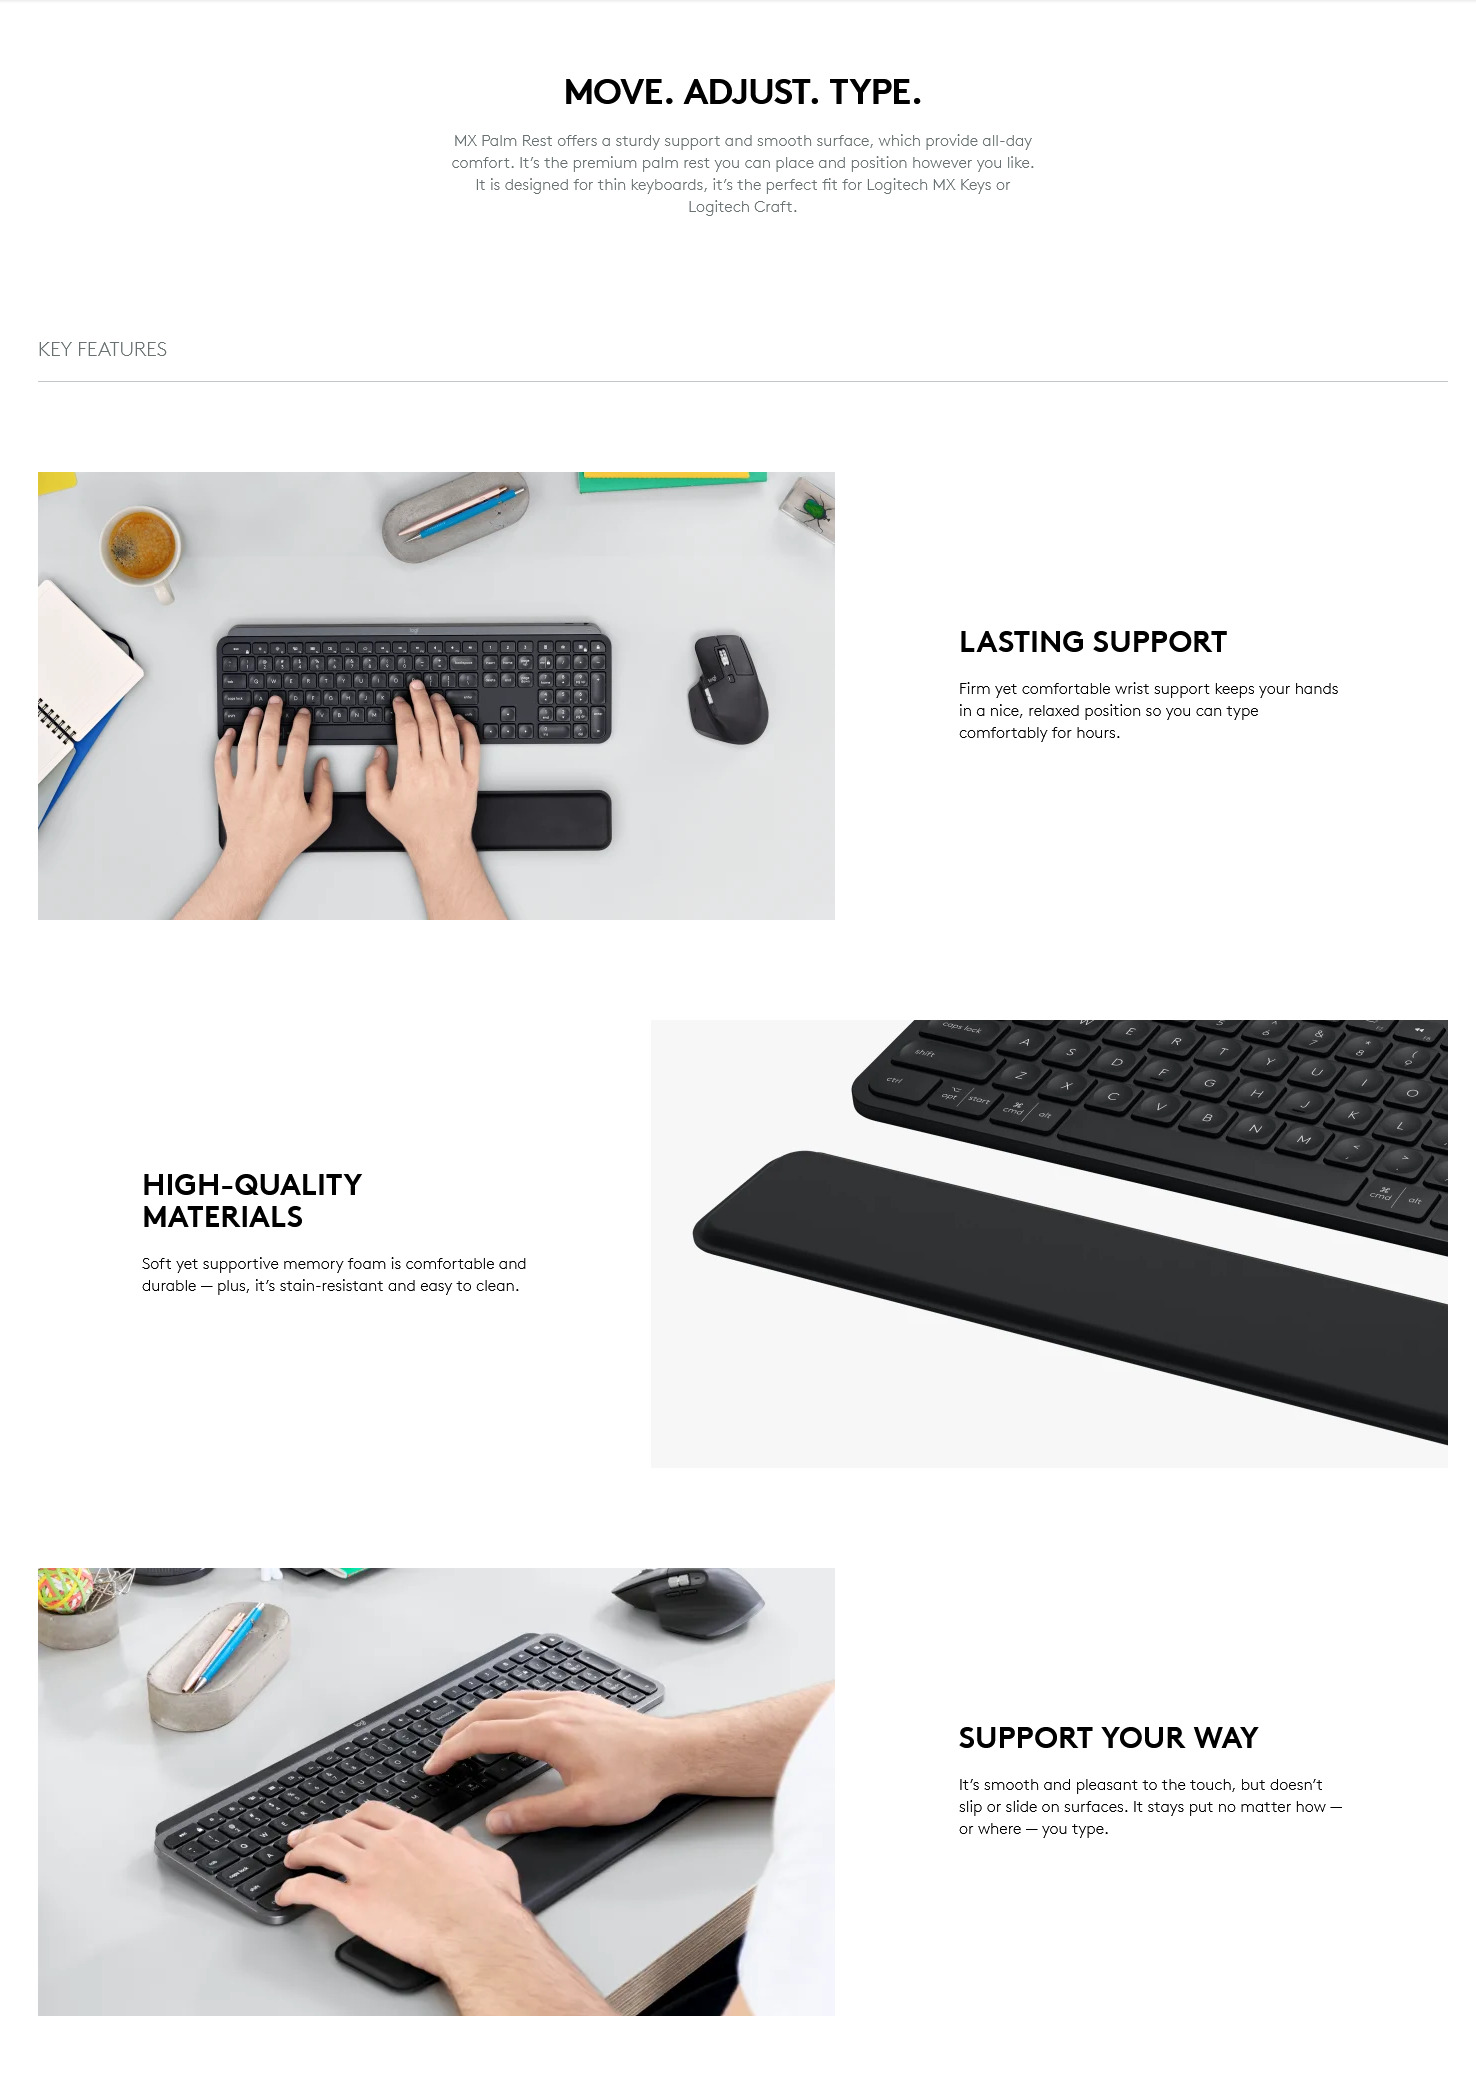 A large marketing image providing additional information about the product Logitech MX Palm Rest - Additional alt info not provided